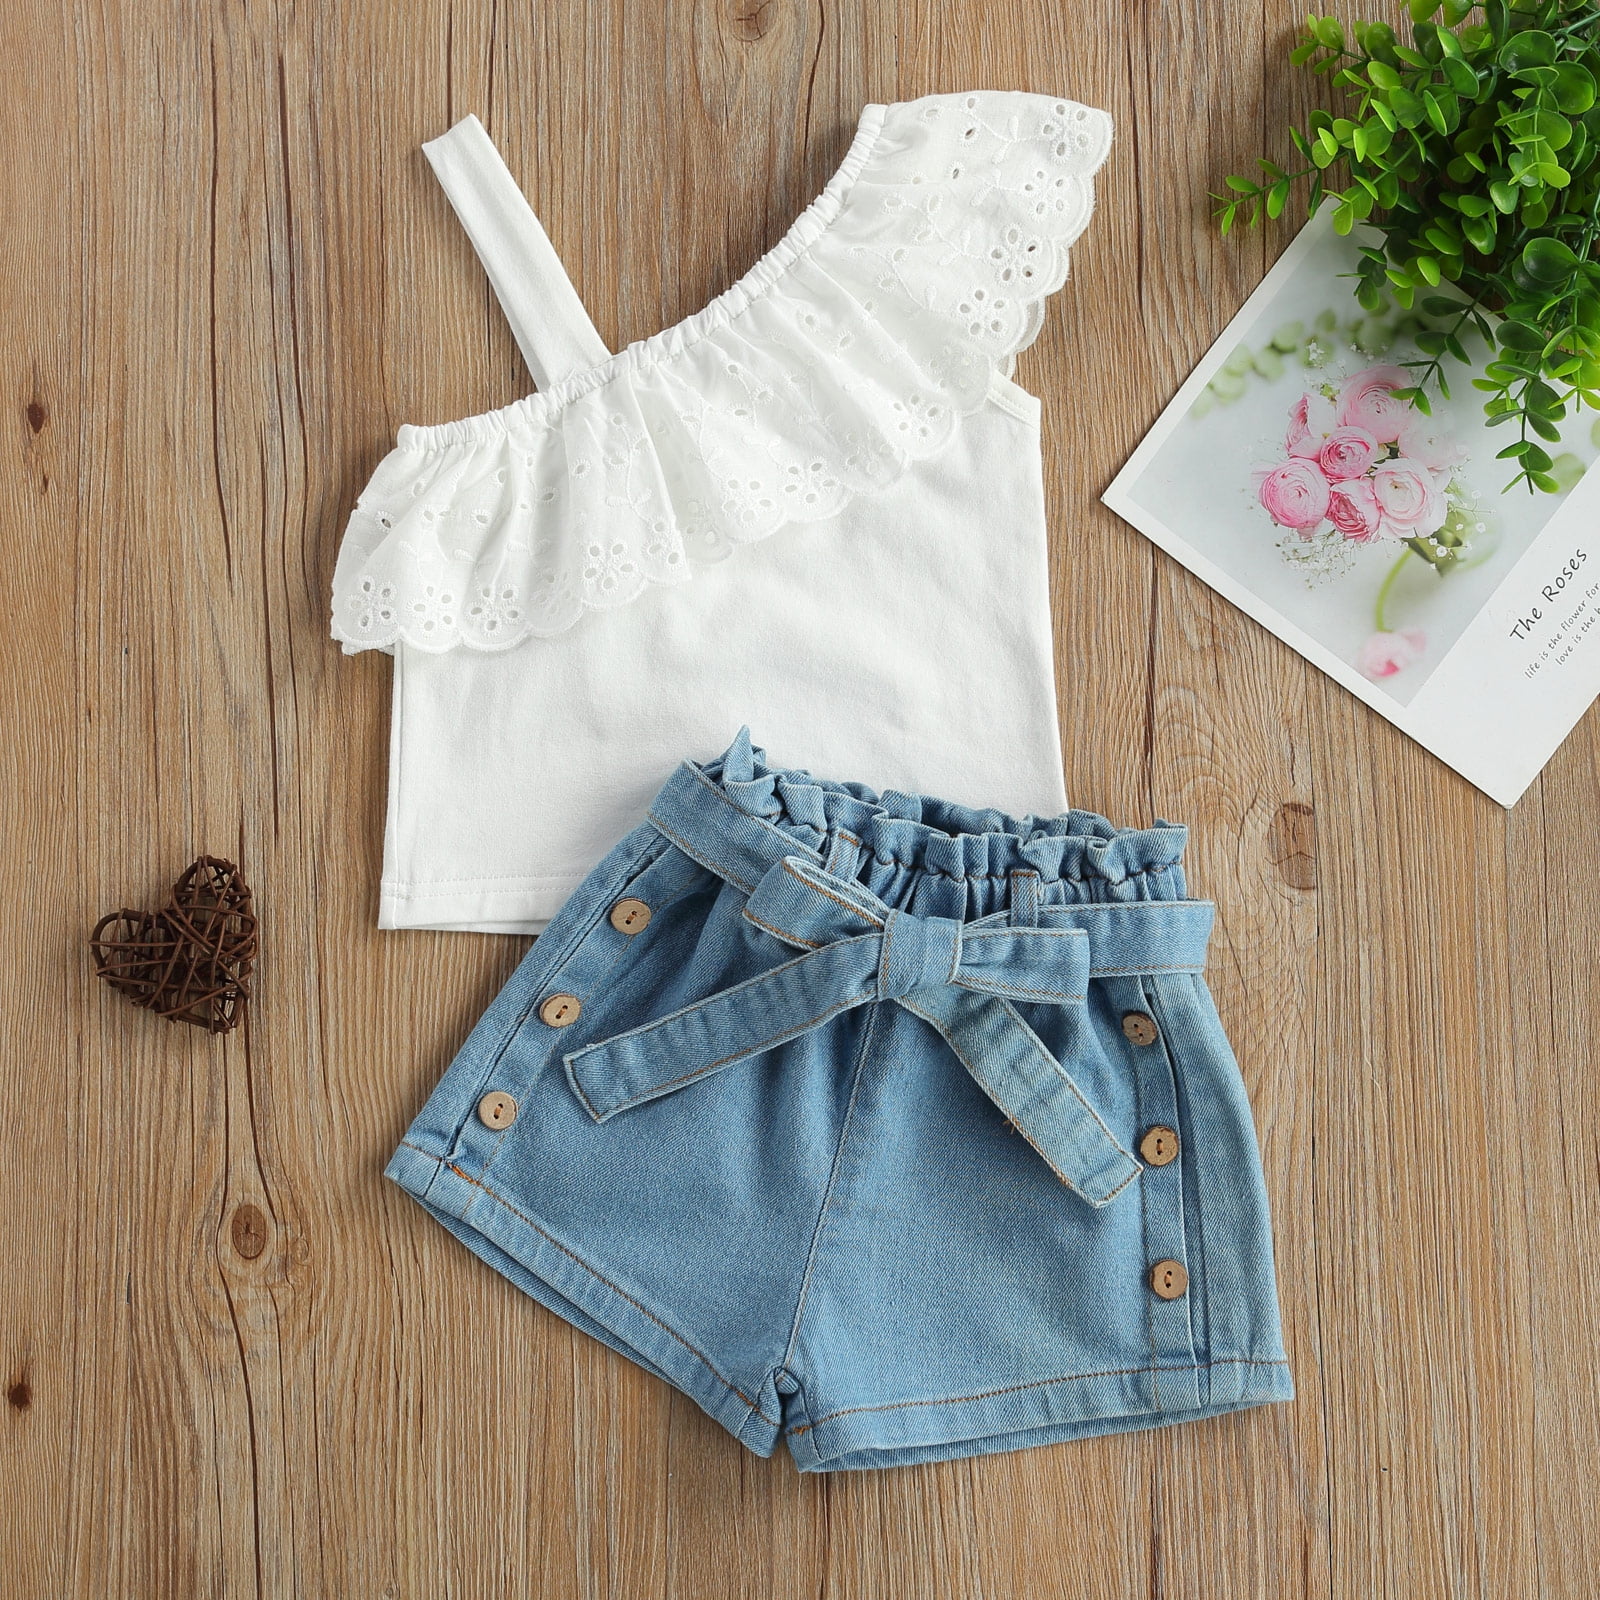 2pcs Baby Girl 100% Cotton Floral Embroidered Sleeveless Ruffle Top and Lace Ripped Denim Shorts Set